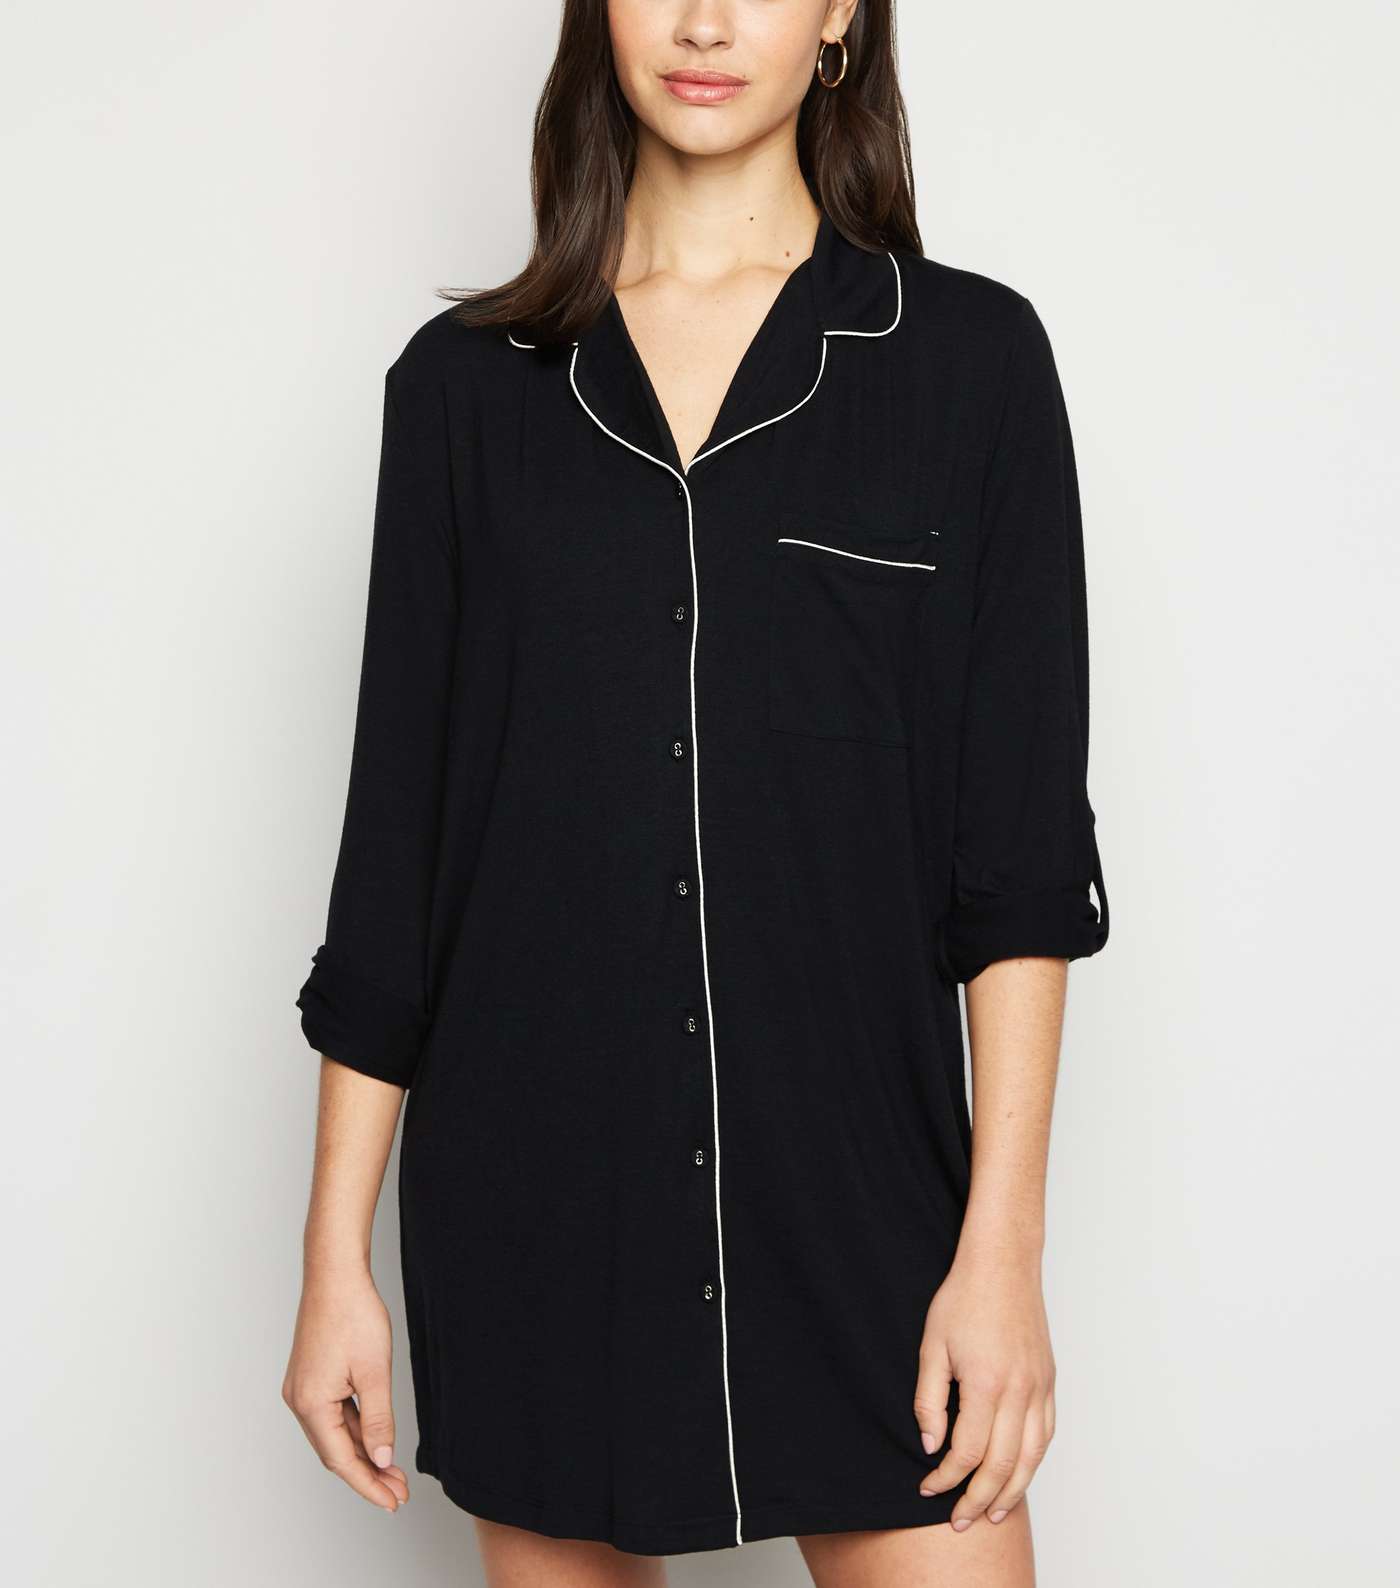 Black Jersey Revere Collar Piped Nightshirt